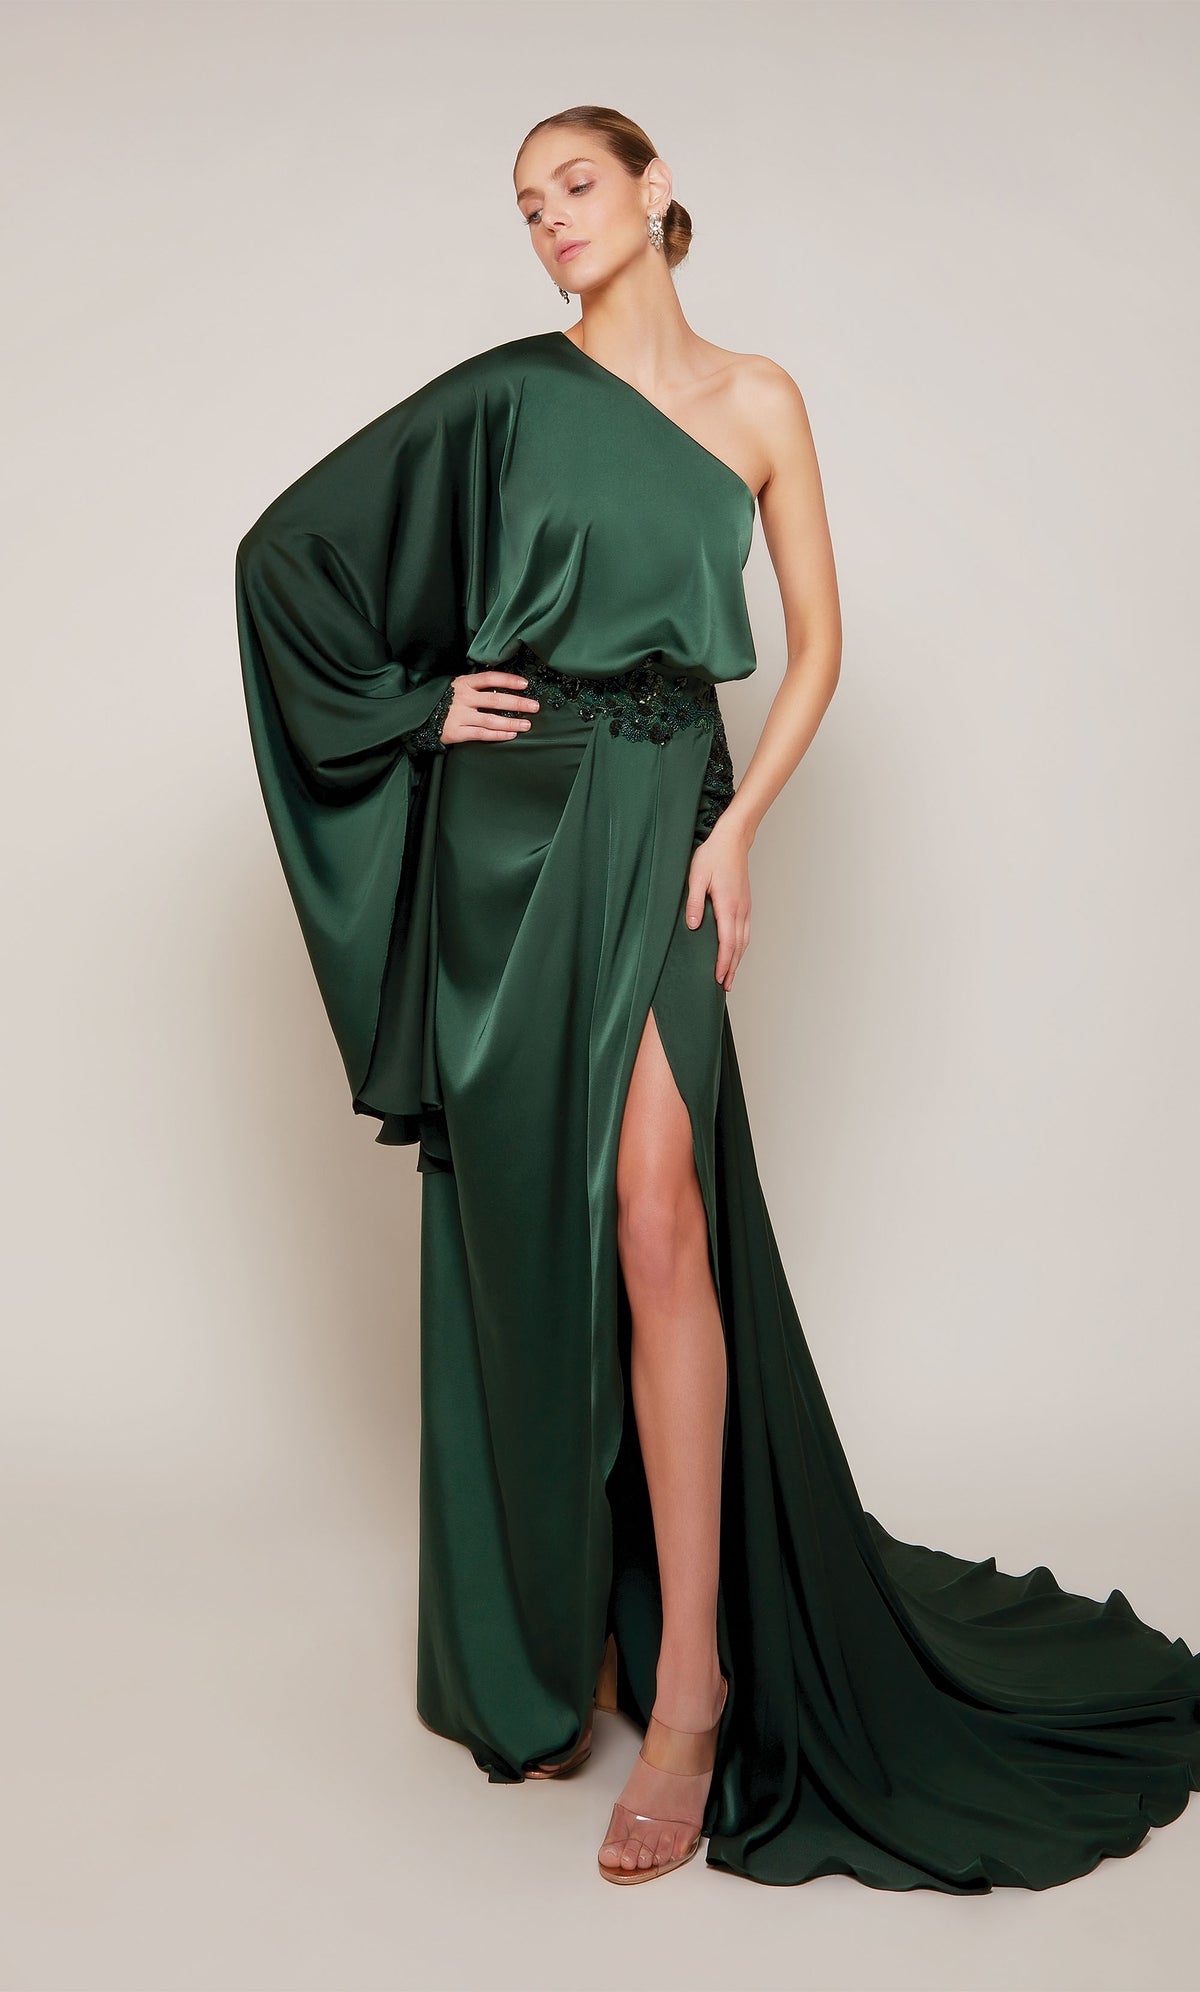 A draped satin evening gown with a one shoulder neckline, beaded waistline, side slit, and train in a rich forest green.